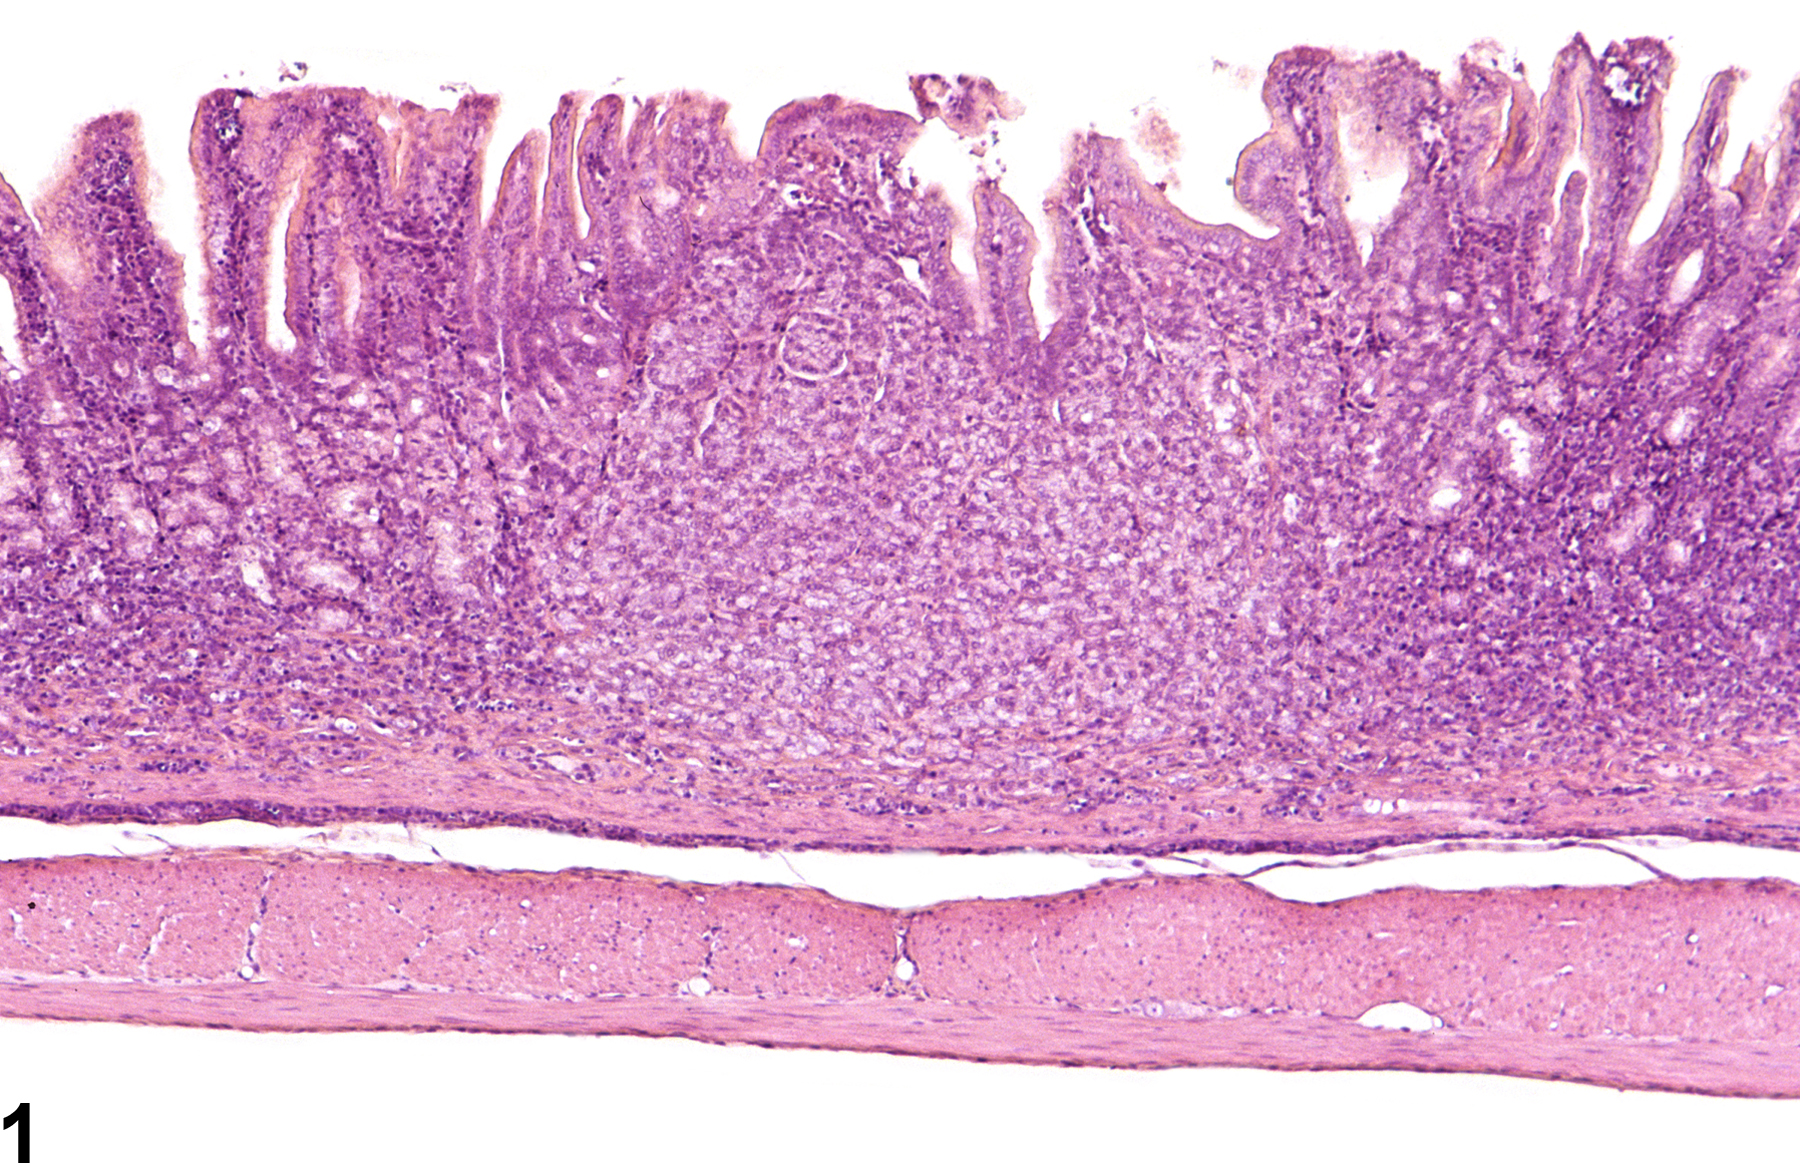 Image of hyperplasia in the glandular stomach neuroendocrine cell from a female F344/N rat in a chronic study